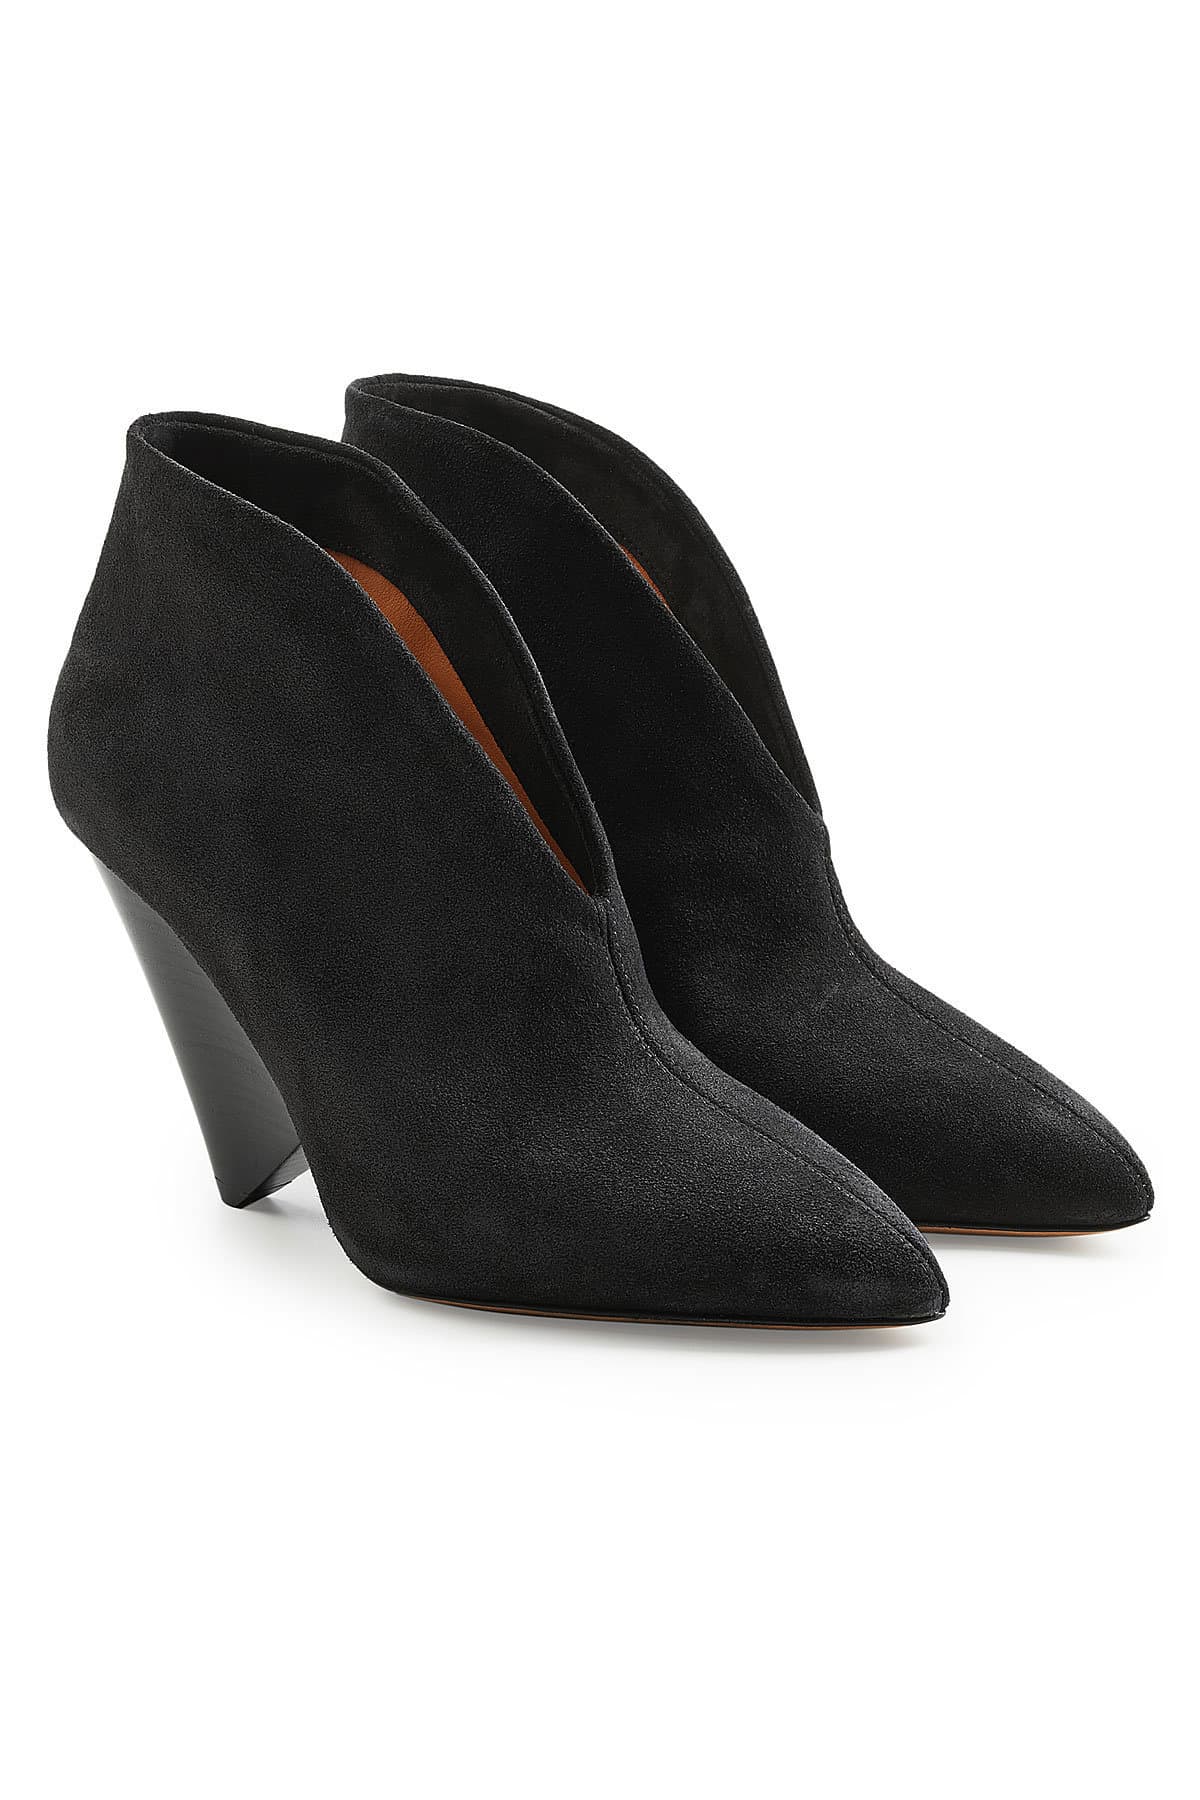 Isabel Marant - Adenn Suede Boots